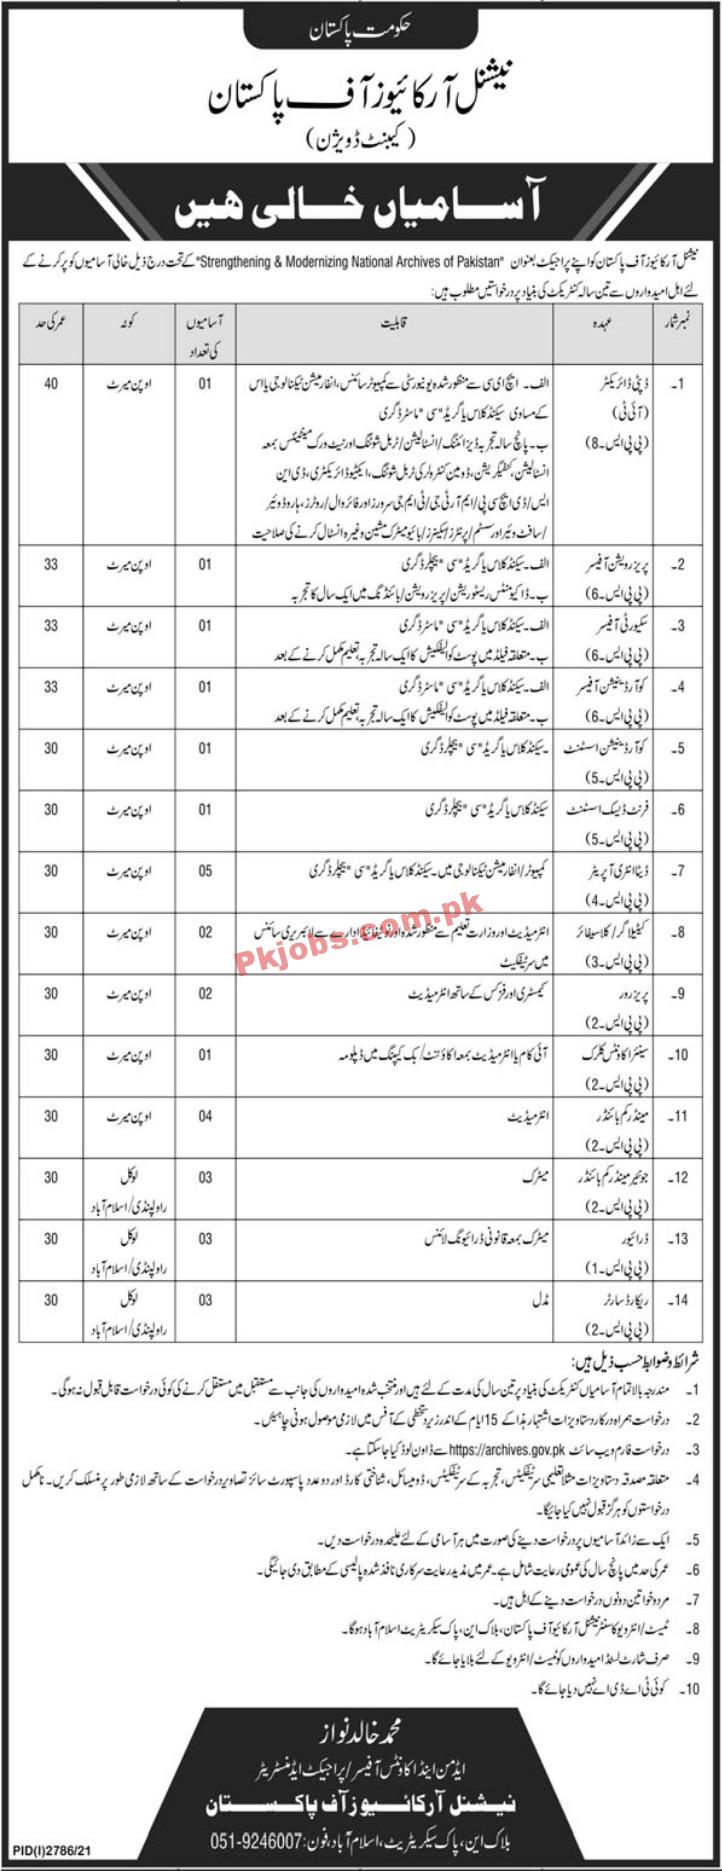 Cabinet Division PK Jobs 2021 | National Archives of Pakistan Cabinet Division Management PK Jobs 2021